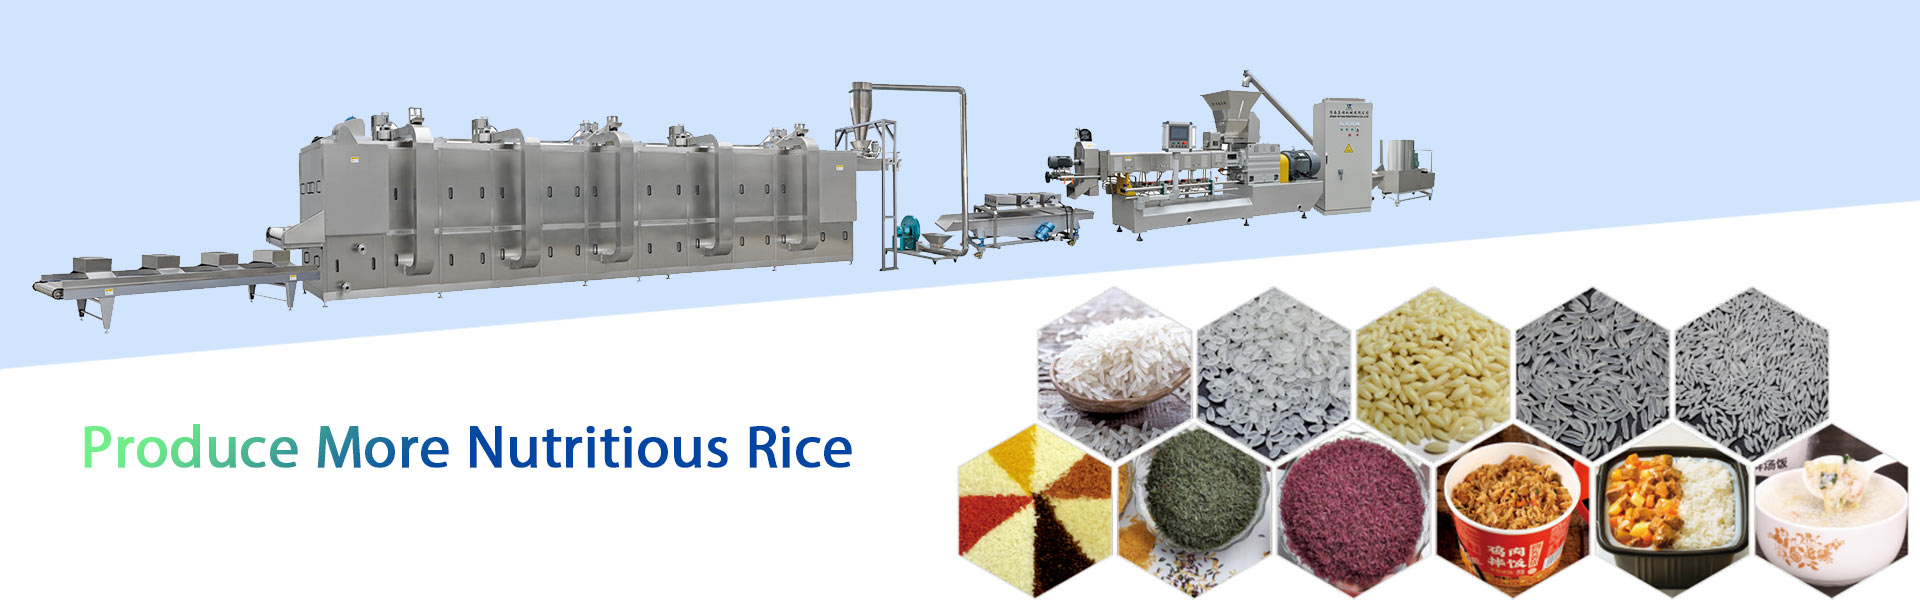 Produce-More-Nutritious-Rice